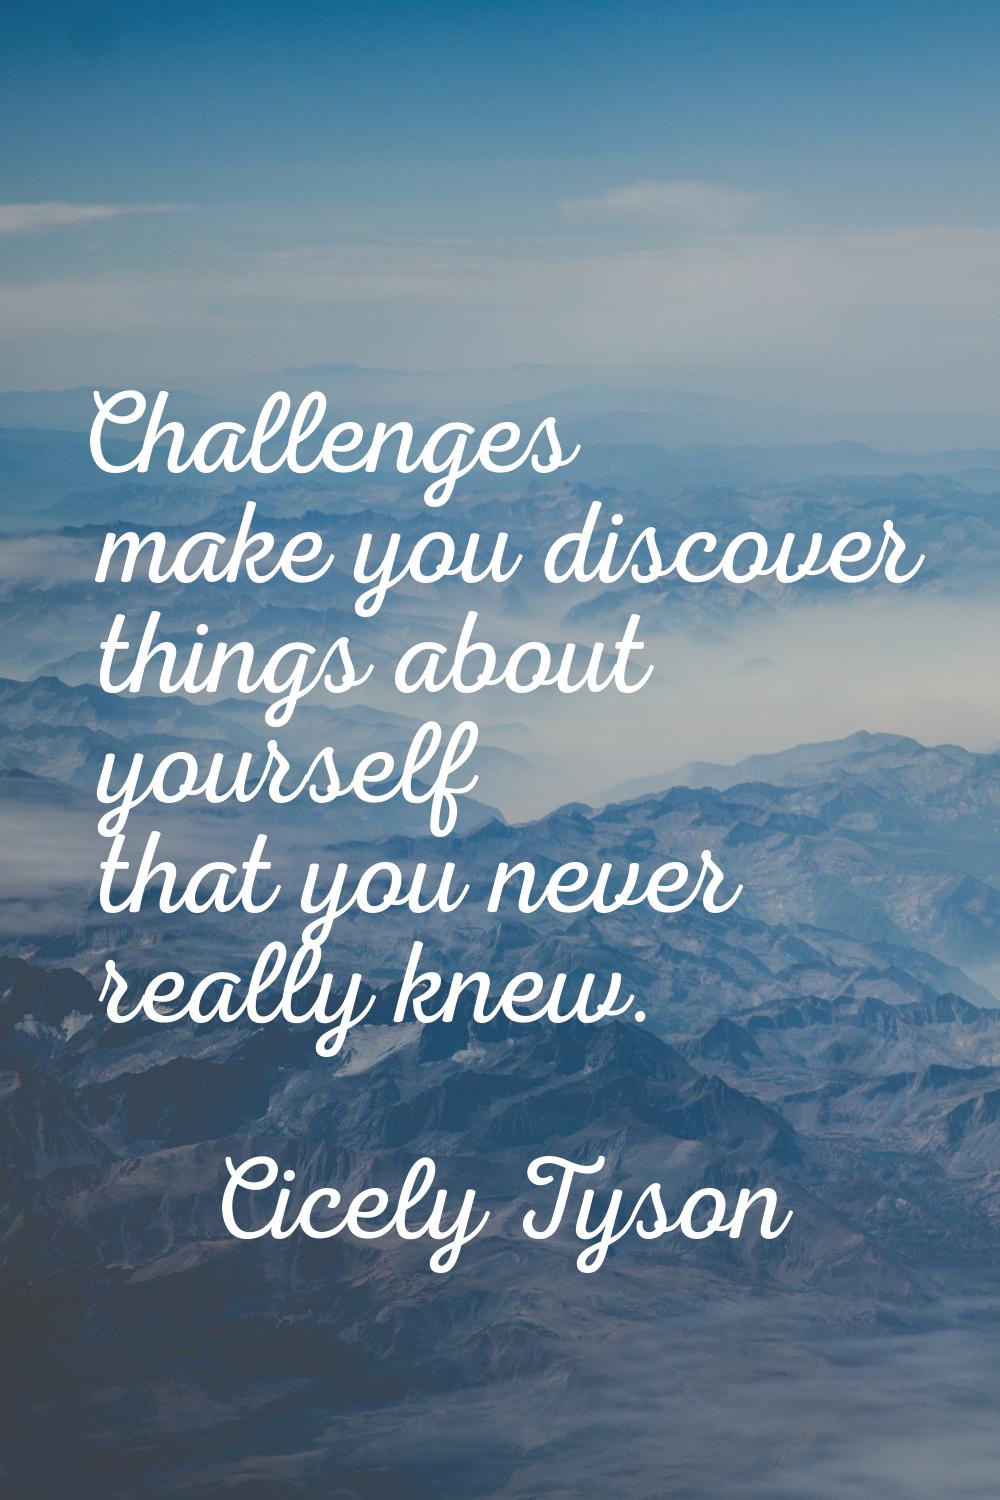 Challenges make you discover things about yourself that you never really knew.